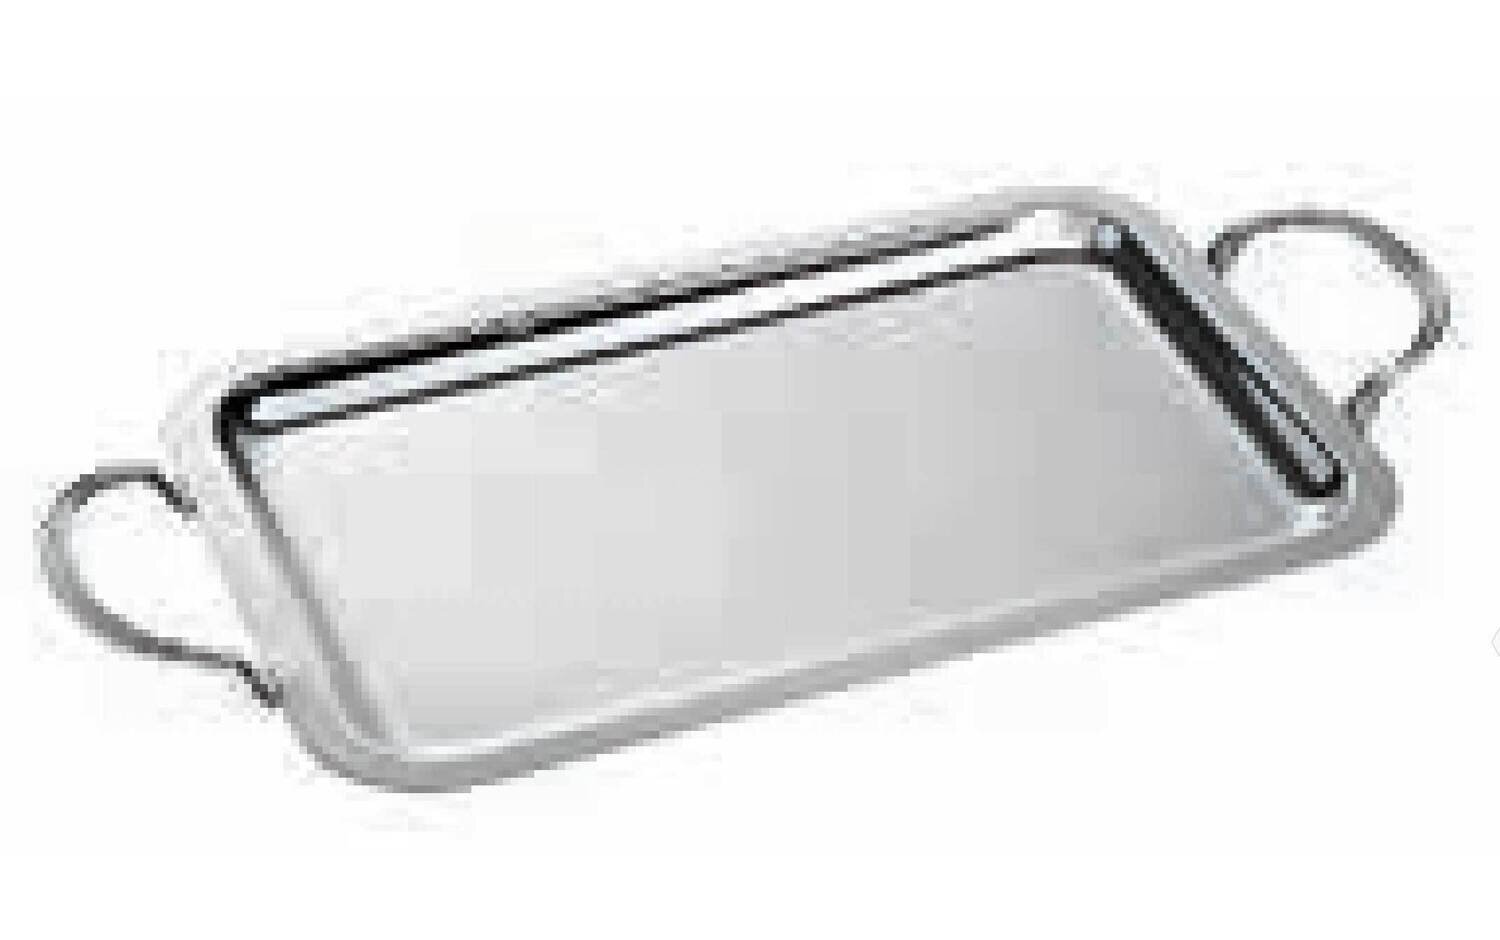 Ercuis Classique Rectangular Serving Tray With Handles 33.5 x 19.625 Inch Stainless Steel F430450-85